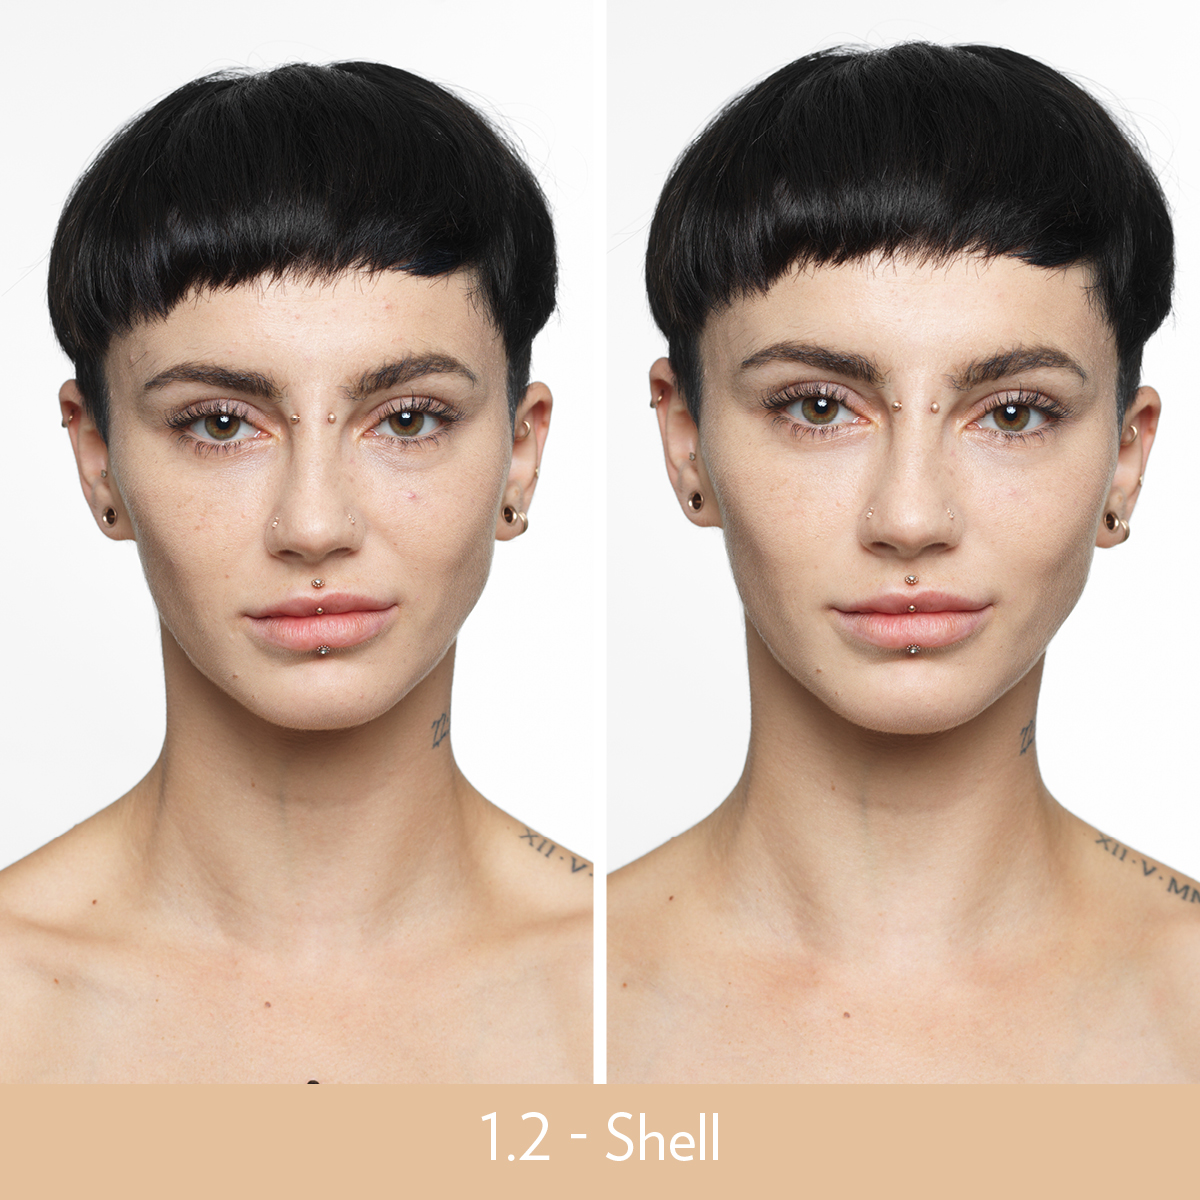 Nu Skin BB+ Skin Loving Foundation 1.2 Shell Before and After